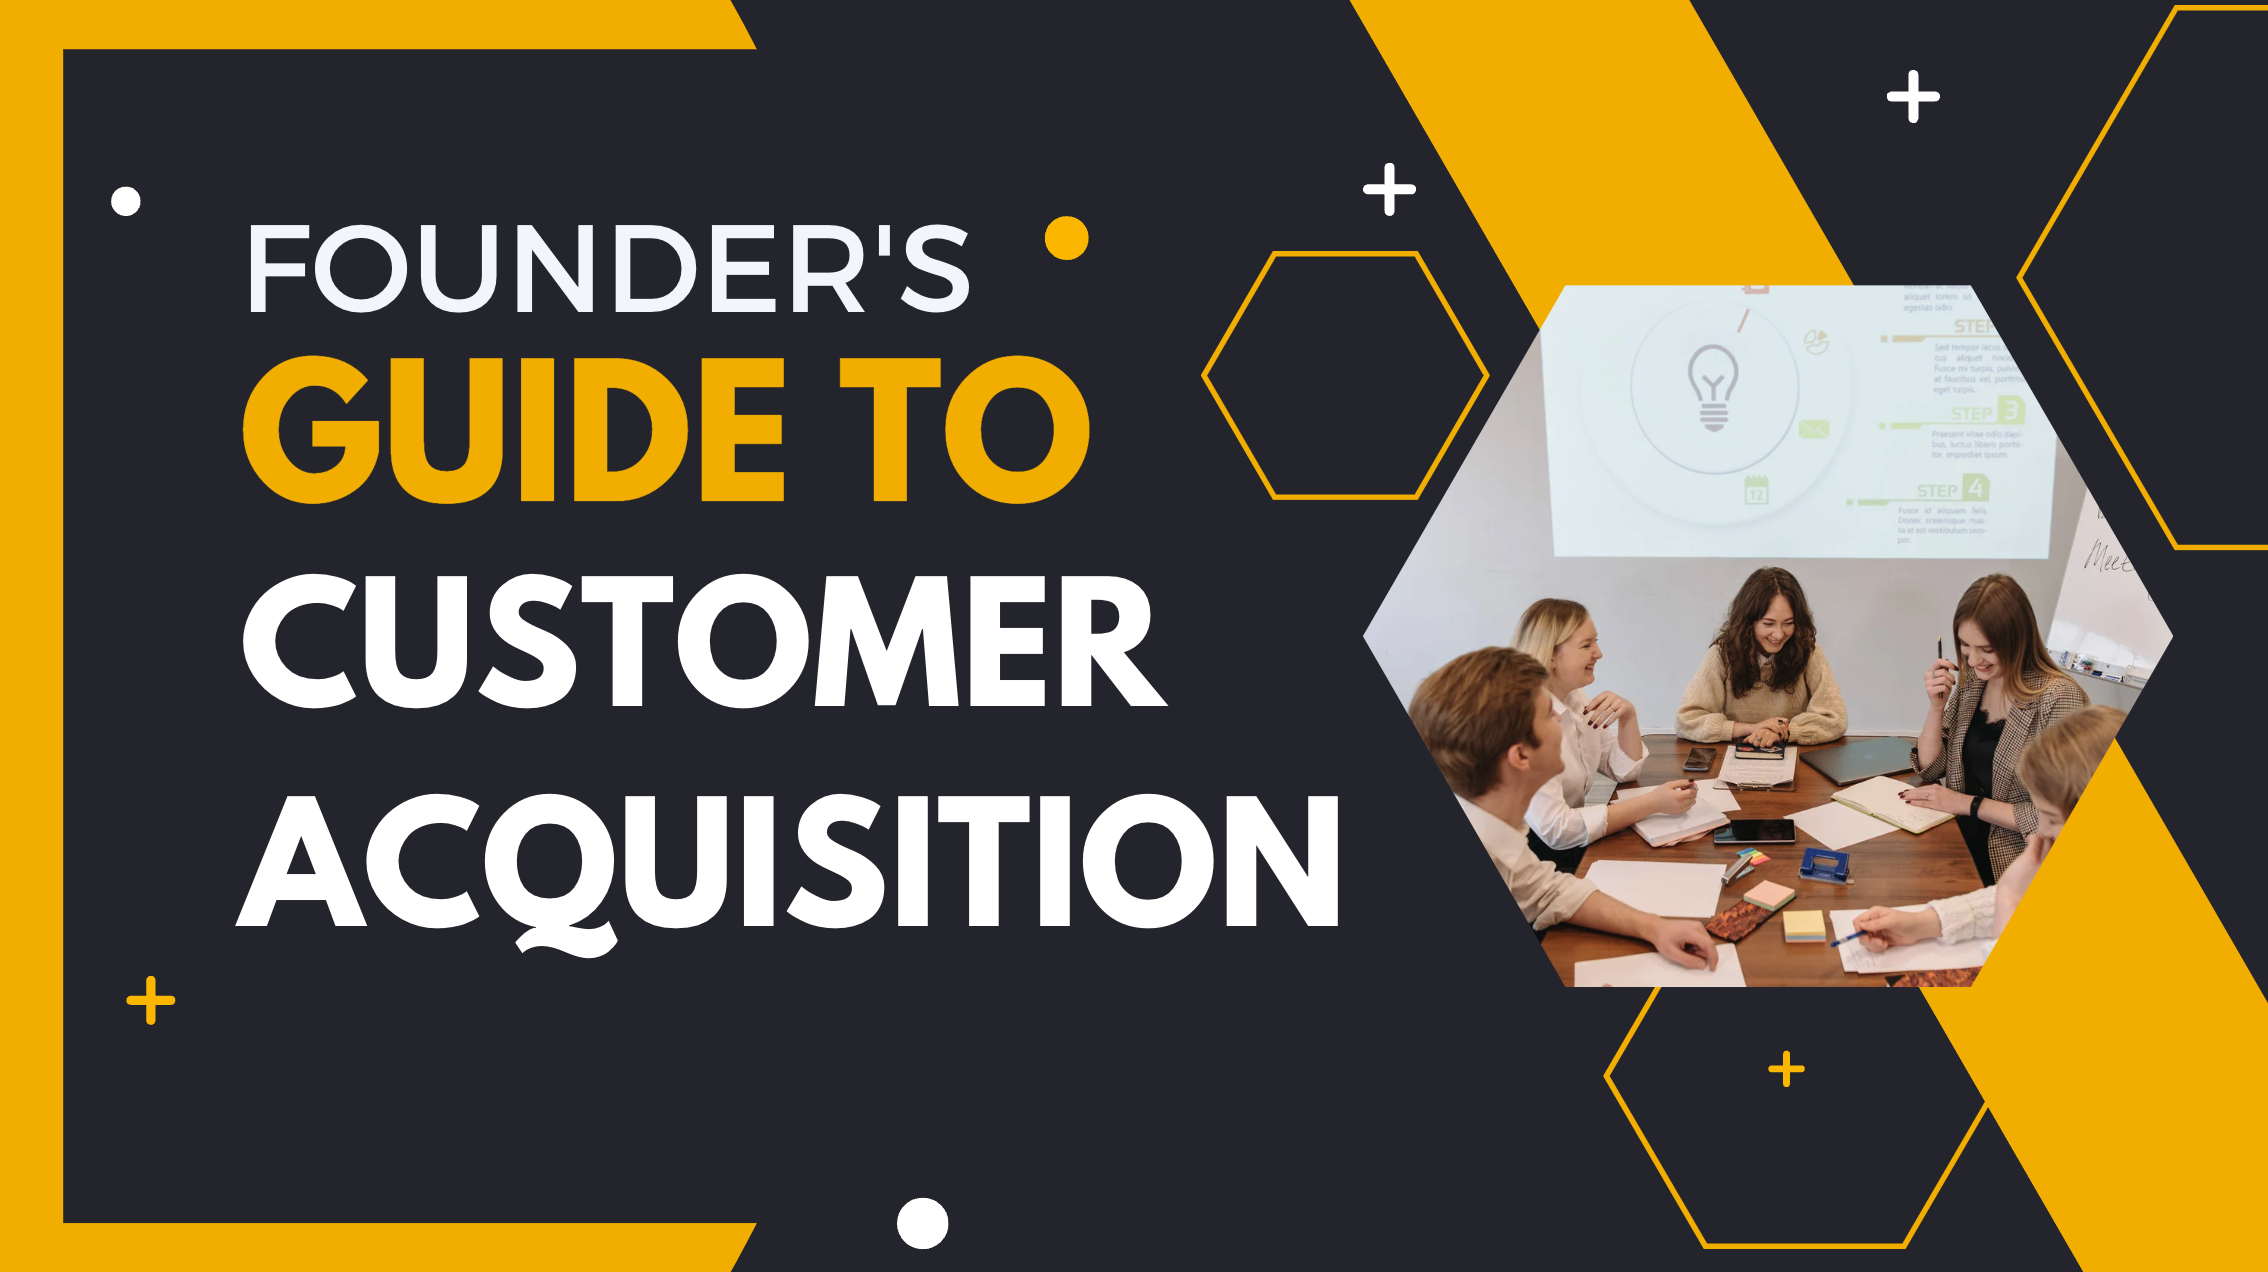 A Professional Founder's Guide to Acquiring More Customers with SaaS Sales Emails [Hacks, Templates & Tools]